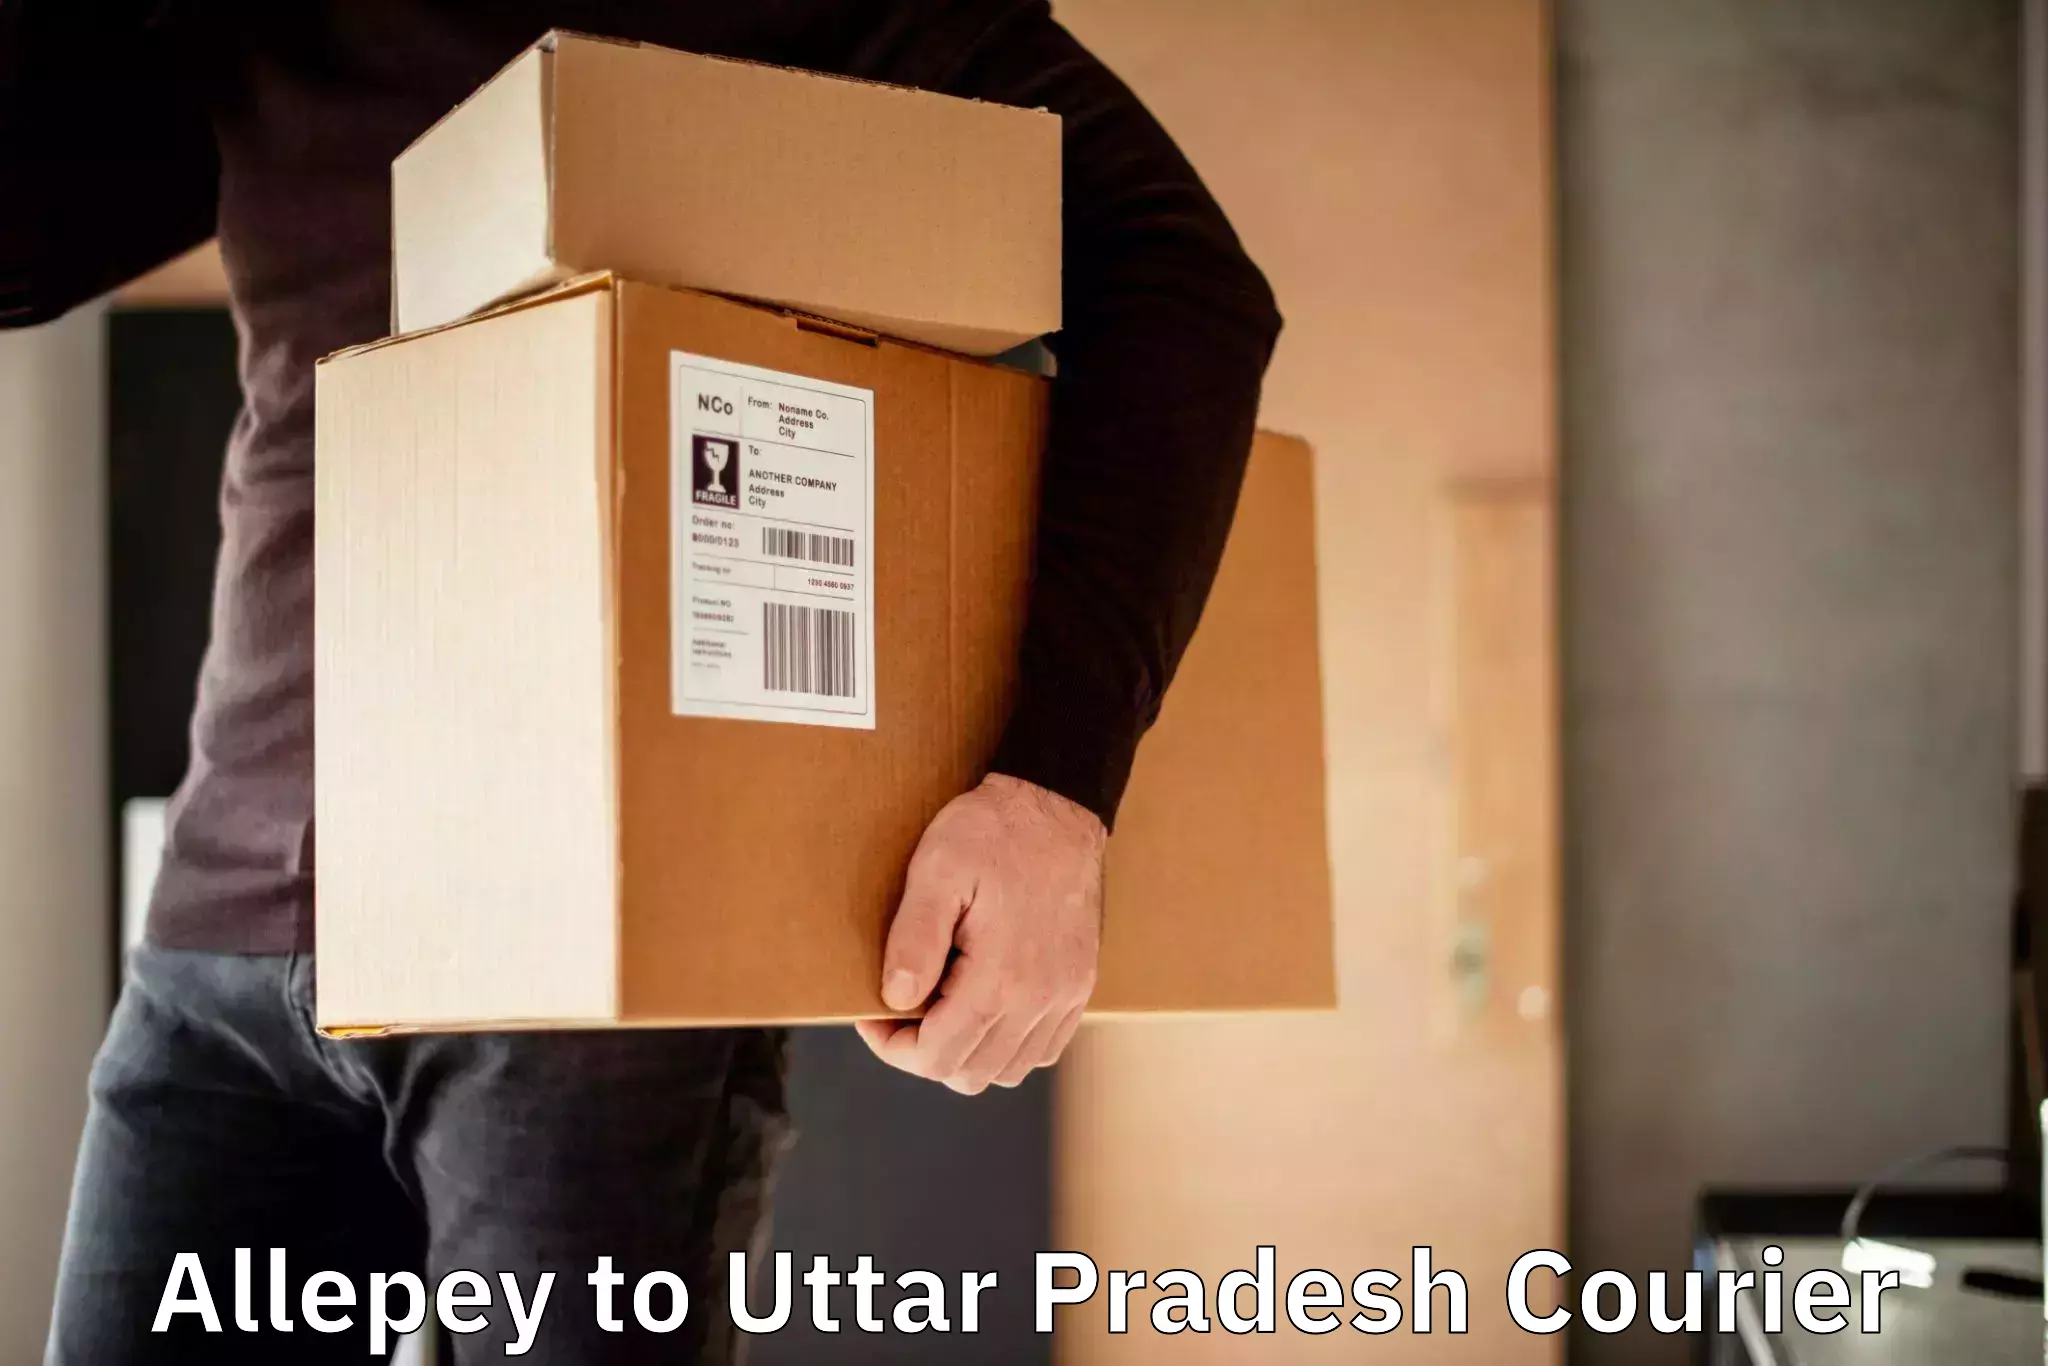 State-of-the-art courier technology Allepey to Uttar Pradesh